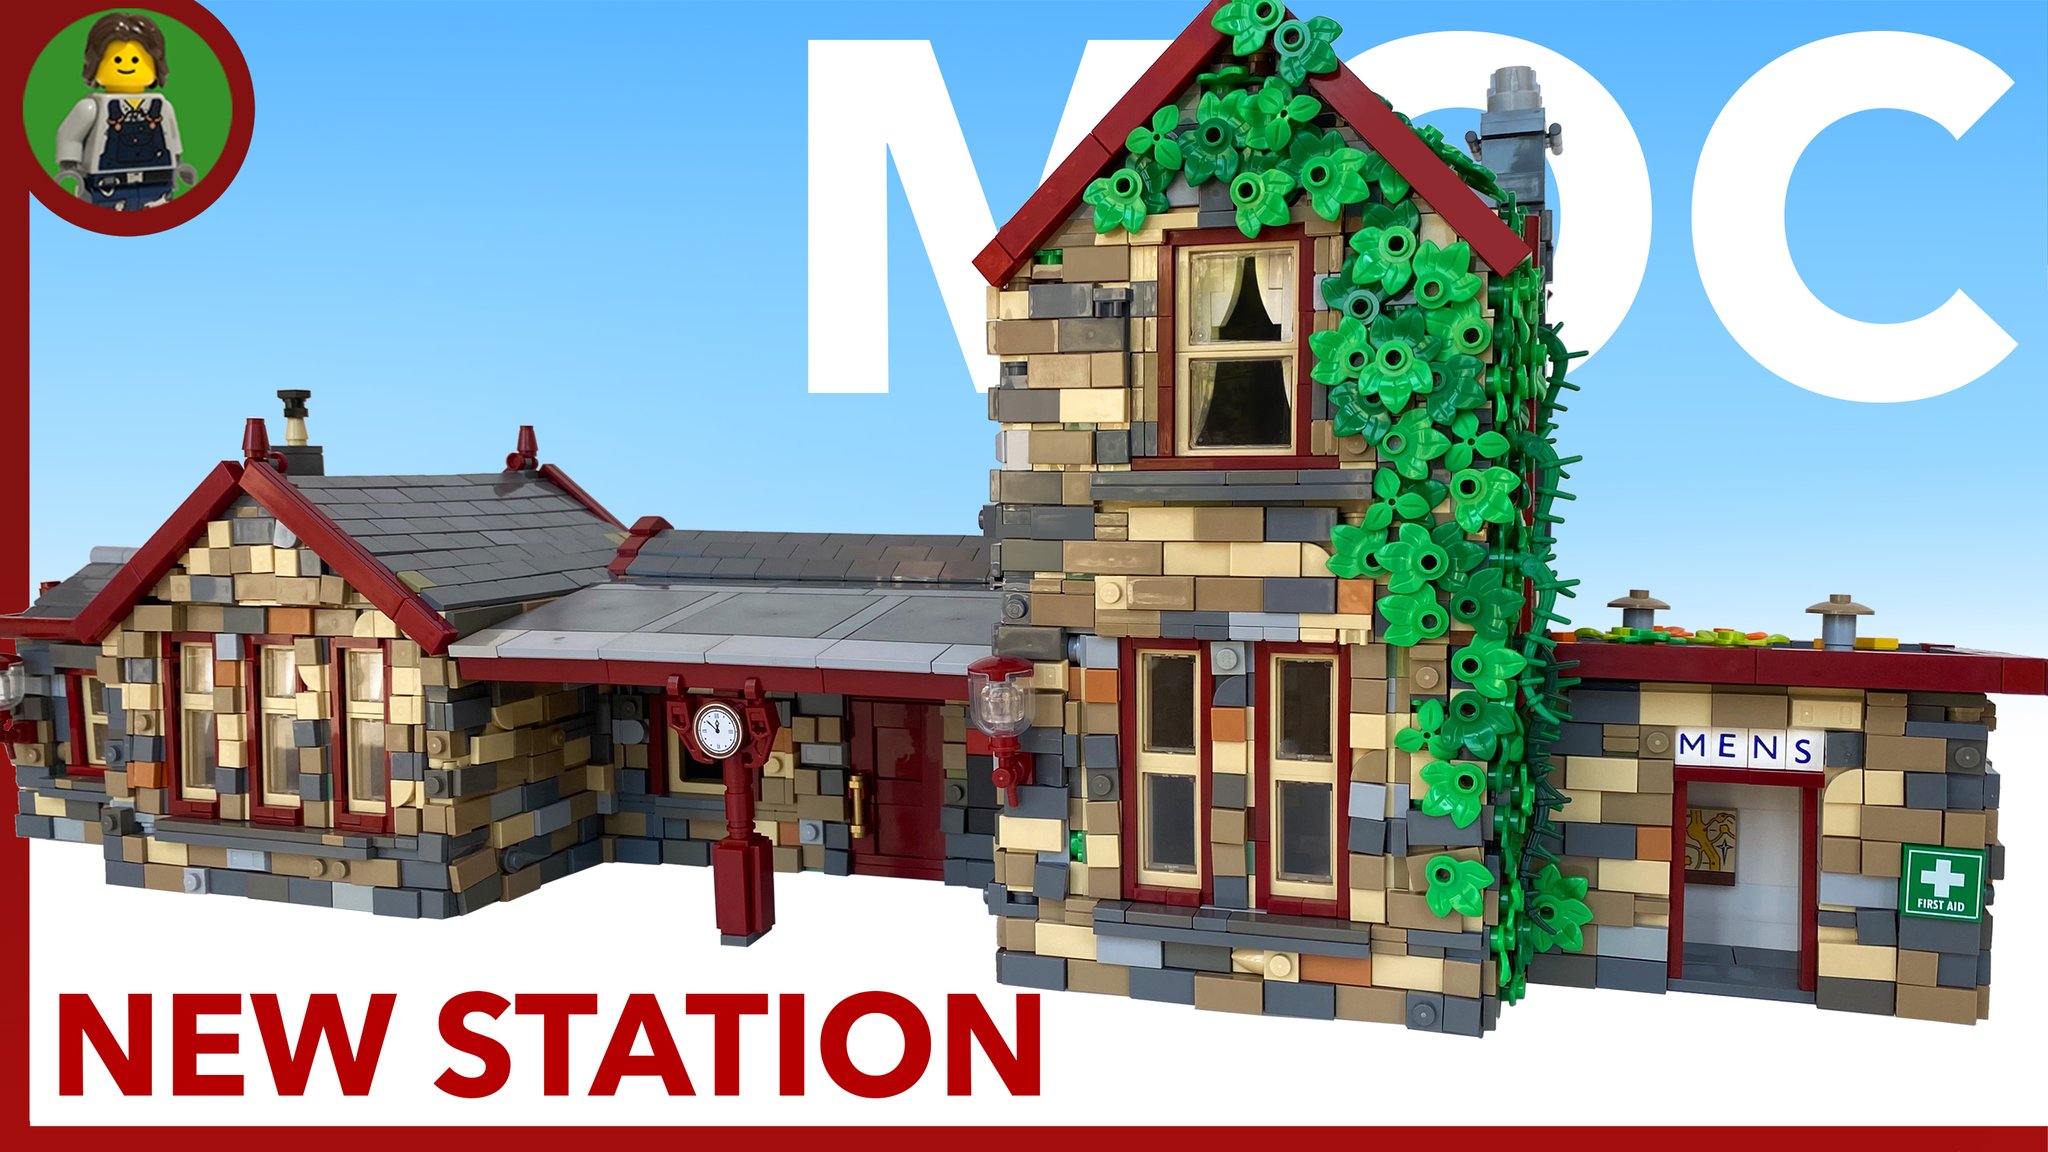 Sam on Twitter: "Check out new LEGO Train Station MOC - SPEED BUILD https://t.co/Kuo3tW3Td6 via @YouTube #LEGO #Station #MOC https://t.co/xbgodViopX" / Twitter